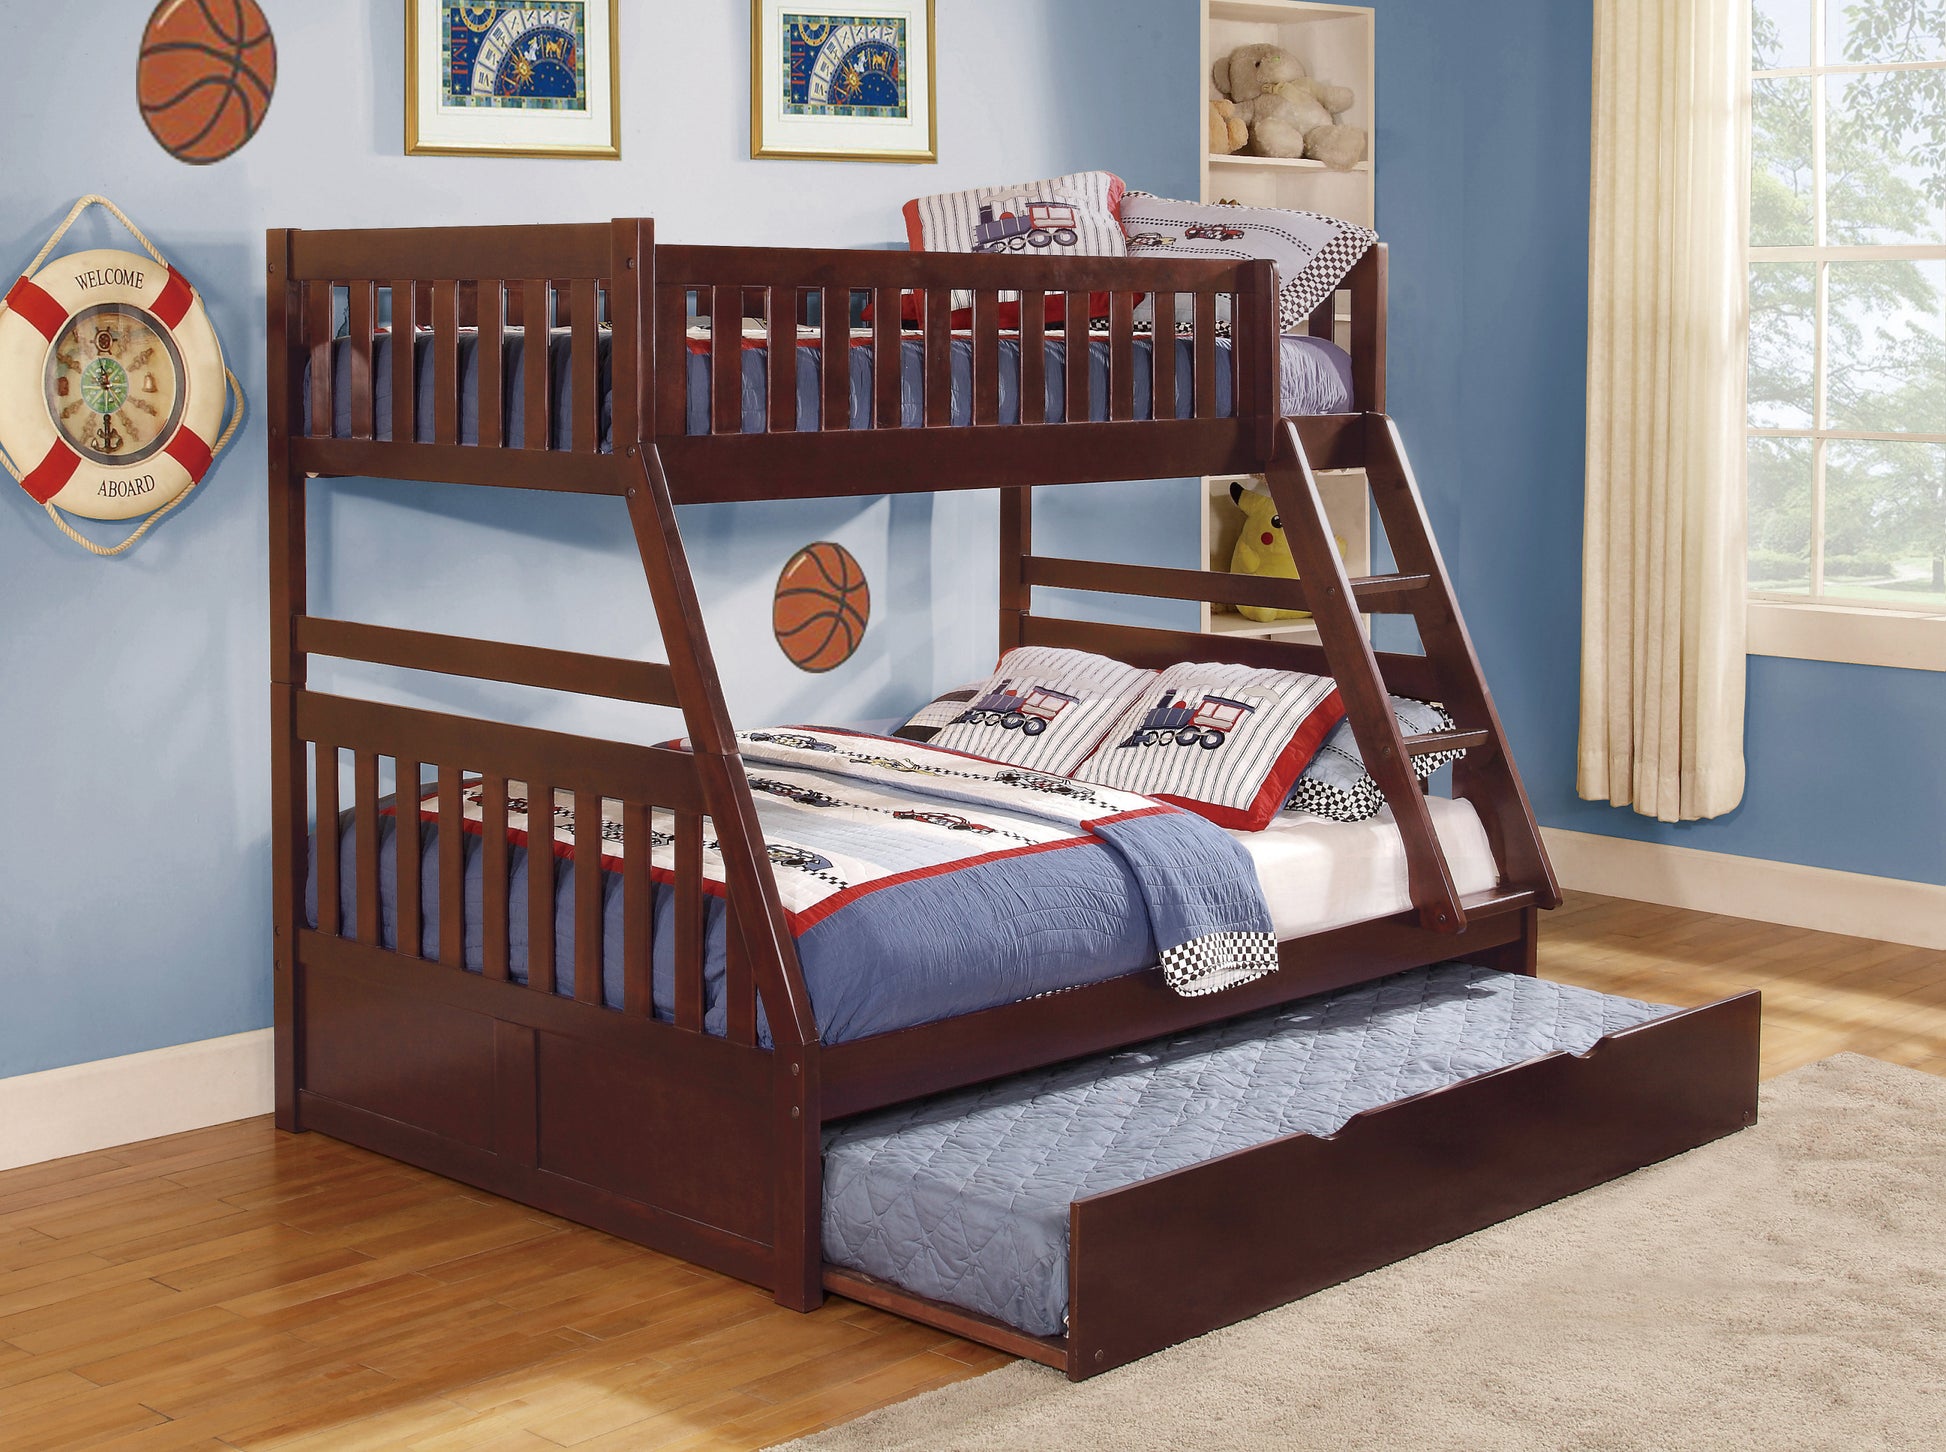 1pc Twin/Full Bunk Bed with Twin Trundle Dark Cherry Finish Wooden Bedroom Furniture - Enova Luxe Home Store